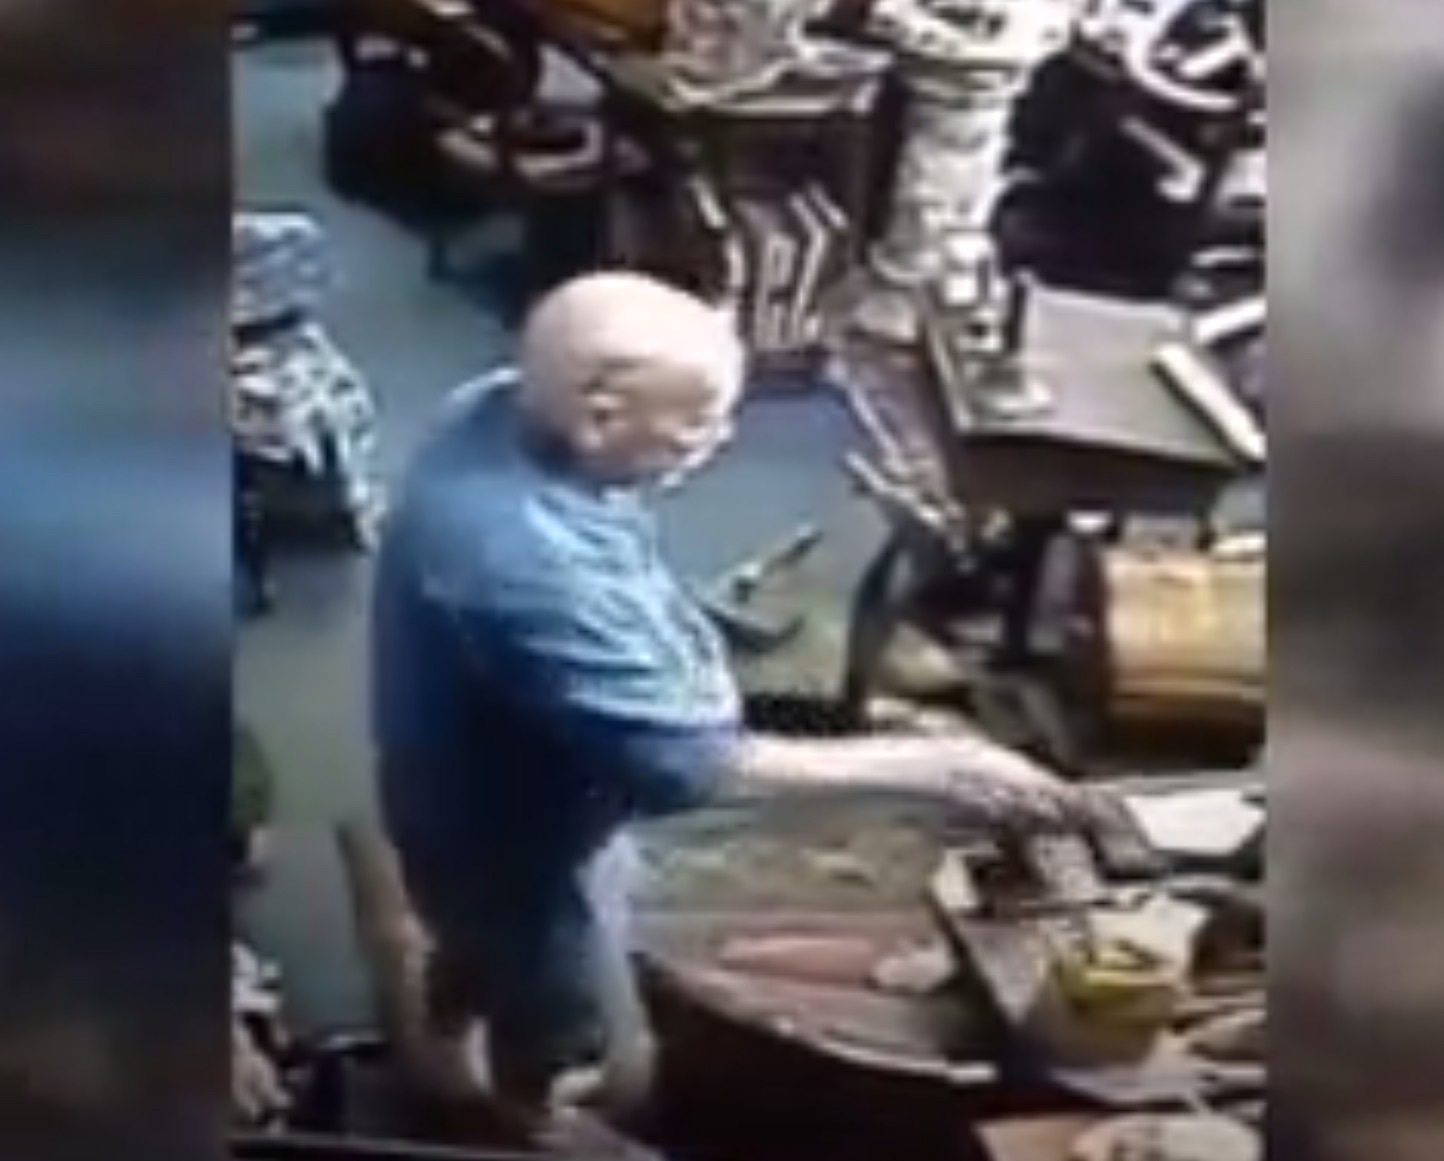 Man Caught On Camera Stuffing Antique Brass Statues Down His Pants